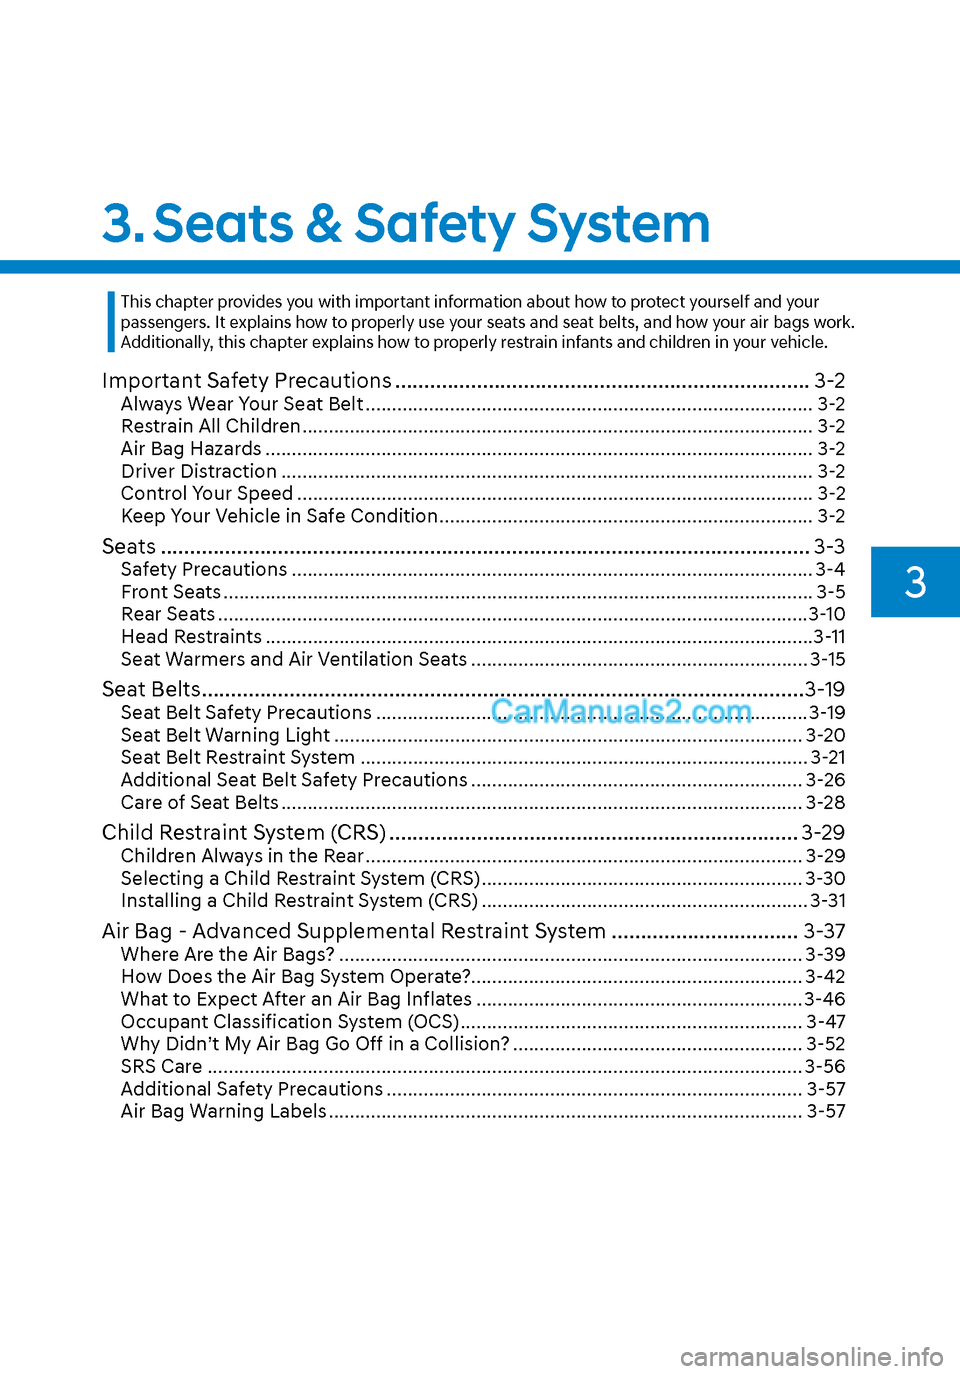 Hyundai Sonata 2020 Owners Guide 3. Seats & Safety System
3
Important Safety Precautions ....................................................................... 3-2
Always Wear Your Seat Belt .........................................